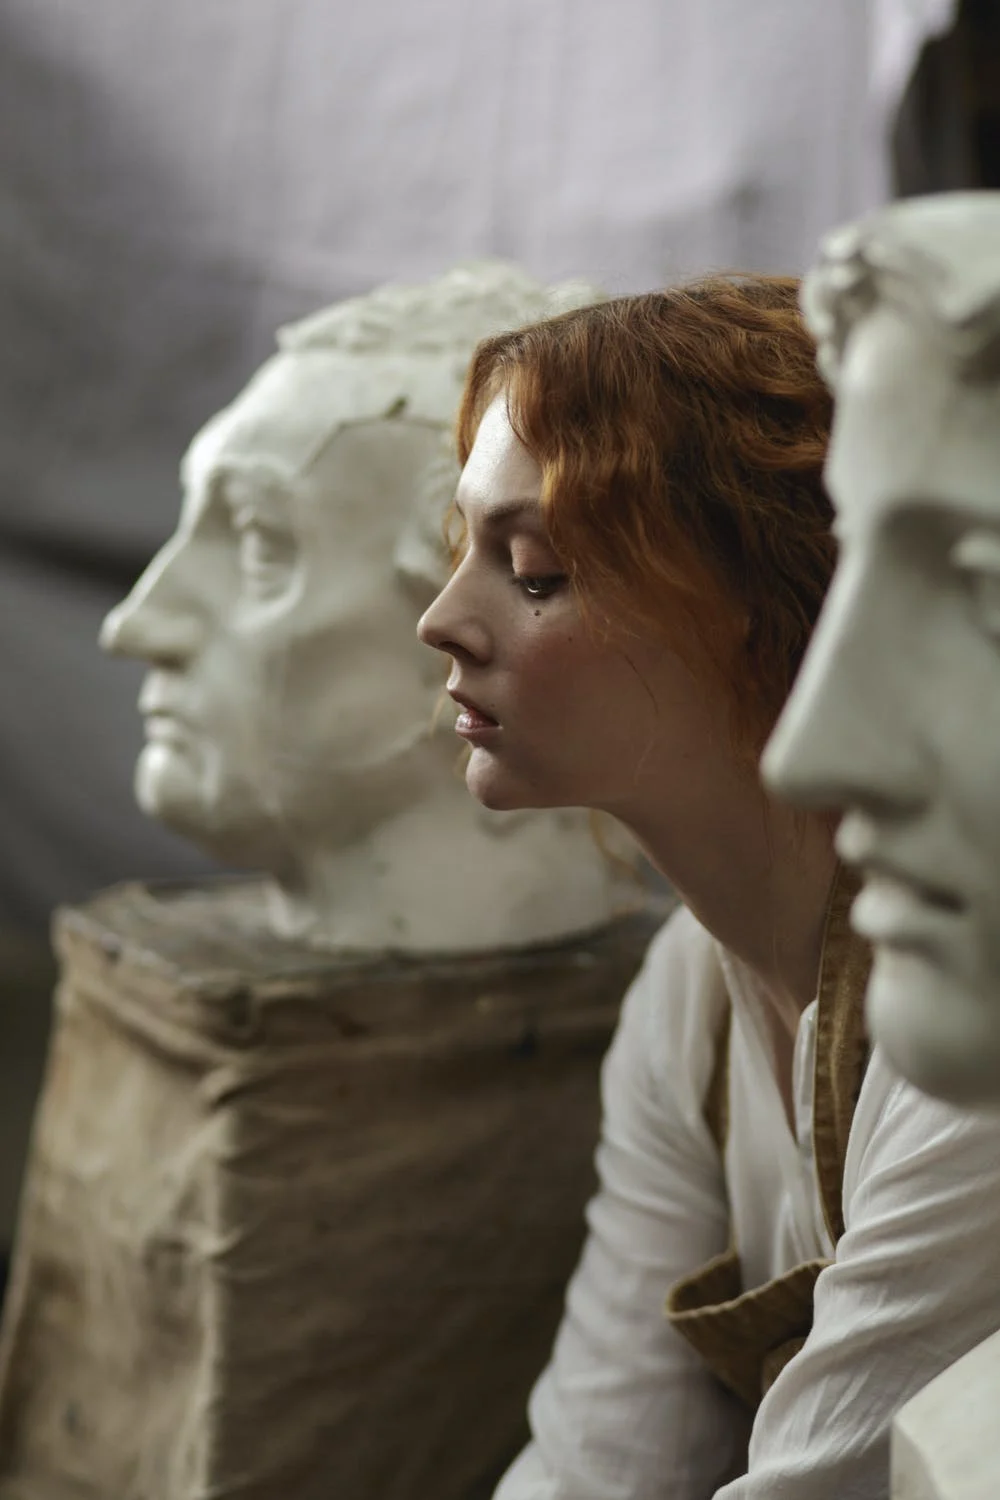 image of a woman sat in between two statue busts of a grecian style